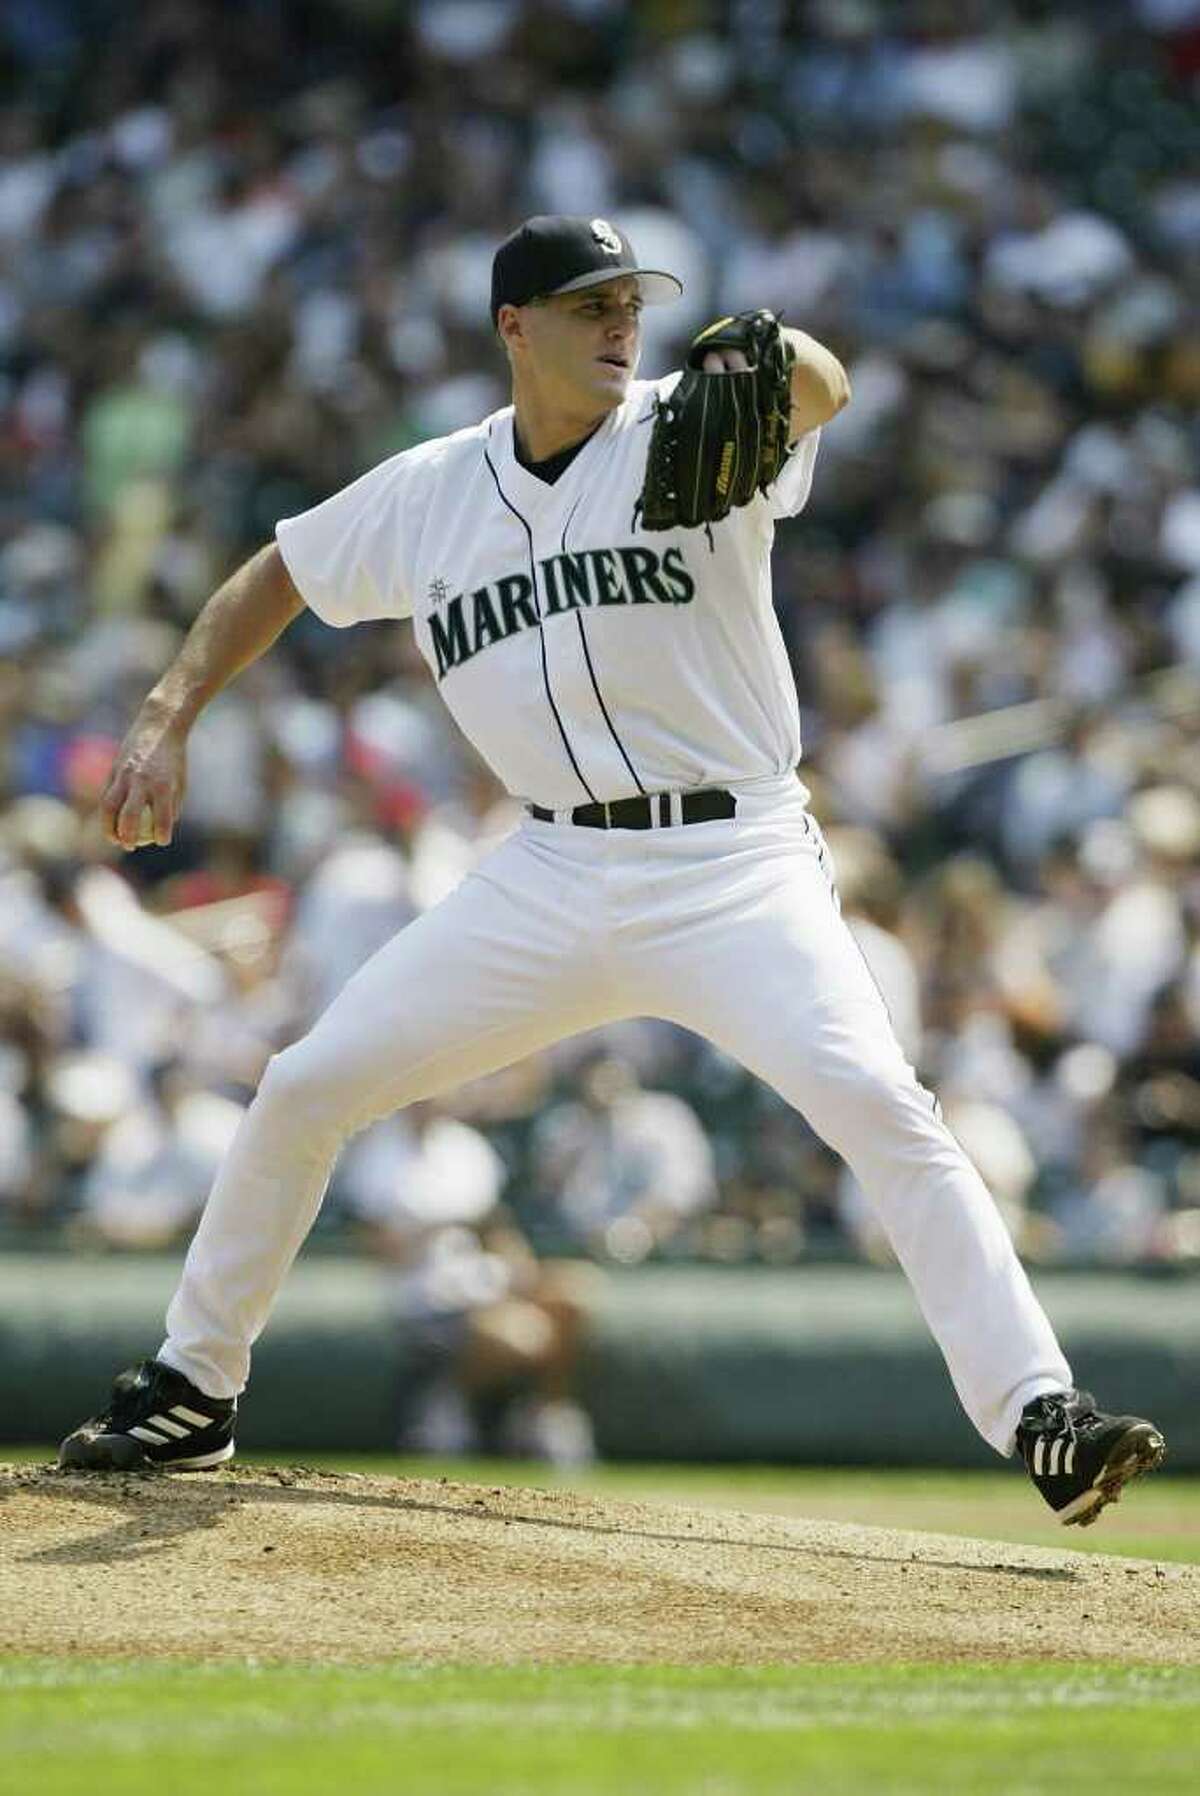 Gil Meche: Meche’s 1999 debut at age 19 made him the second youngest Mariner in franchise history. He made 30 starts in his first two seasons, but arthroscopic surgery on his rotator cuff provided a major setback. Aside from the recovery time, Meche was also faced with working his way back to the majors. He wouldn’t return until 2003, when he posted a 15-13 record and a 4.59 ERA. He bolted to the money in Kansas City in 2007, where he made his lone All-Star appearance. However, his injury and subsequent trip through the minors to return was impressive.